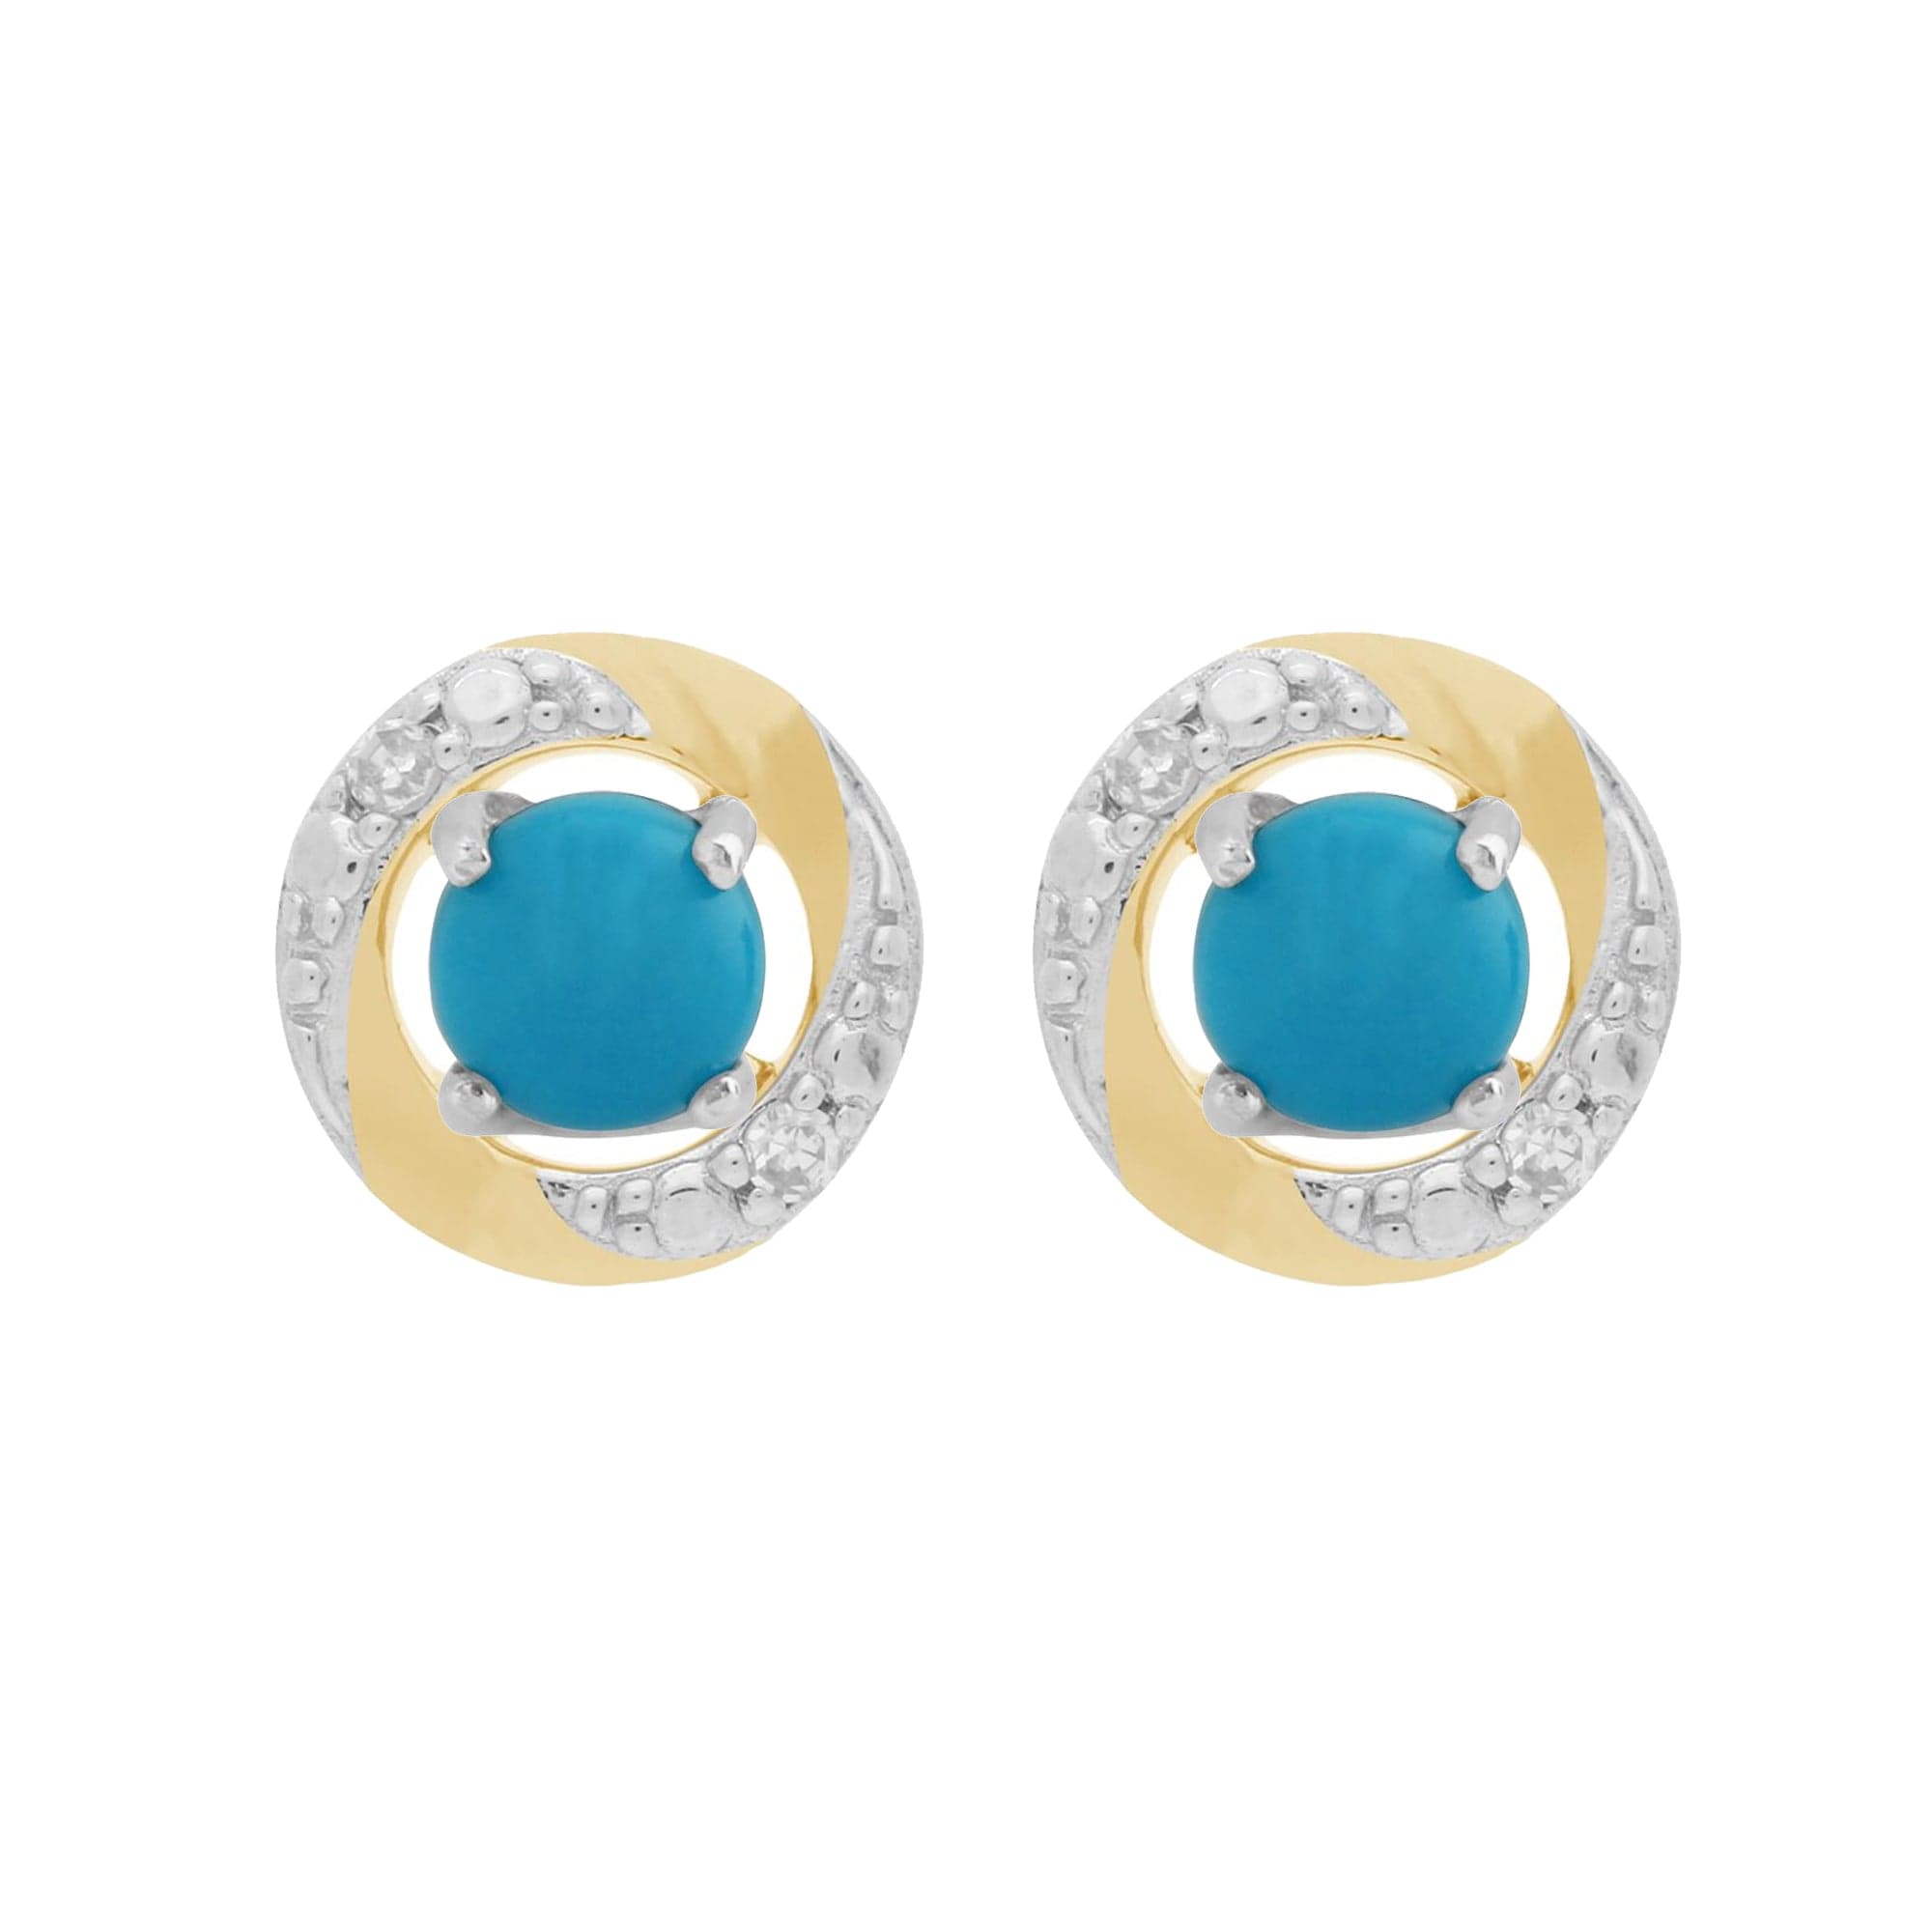 162E0071219-191E0374019 9ct White Gold Turquoise Stud Earrings with Detachable Diamond Halo Ear Jacket in 9ct Yellow Gold 1